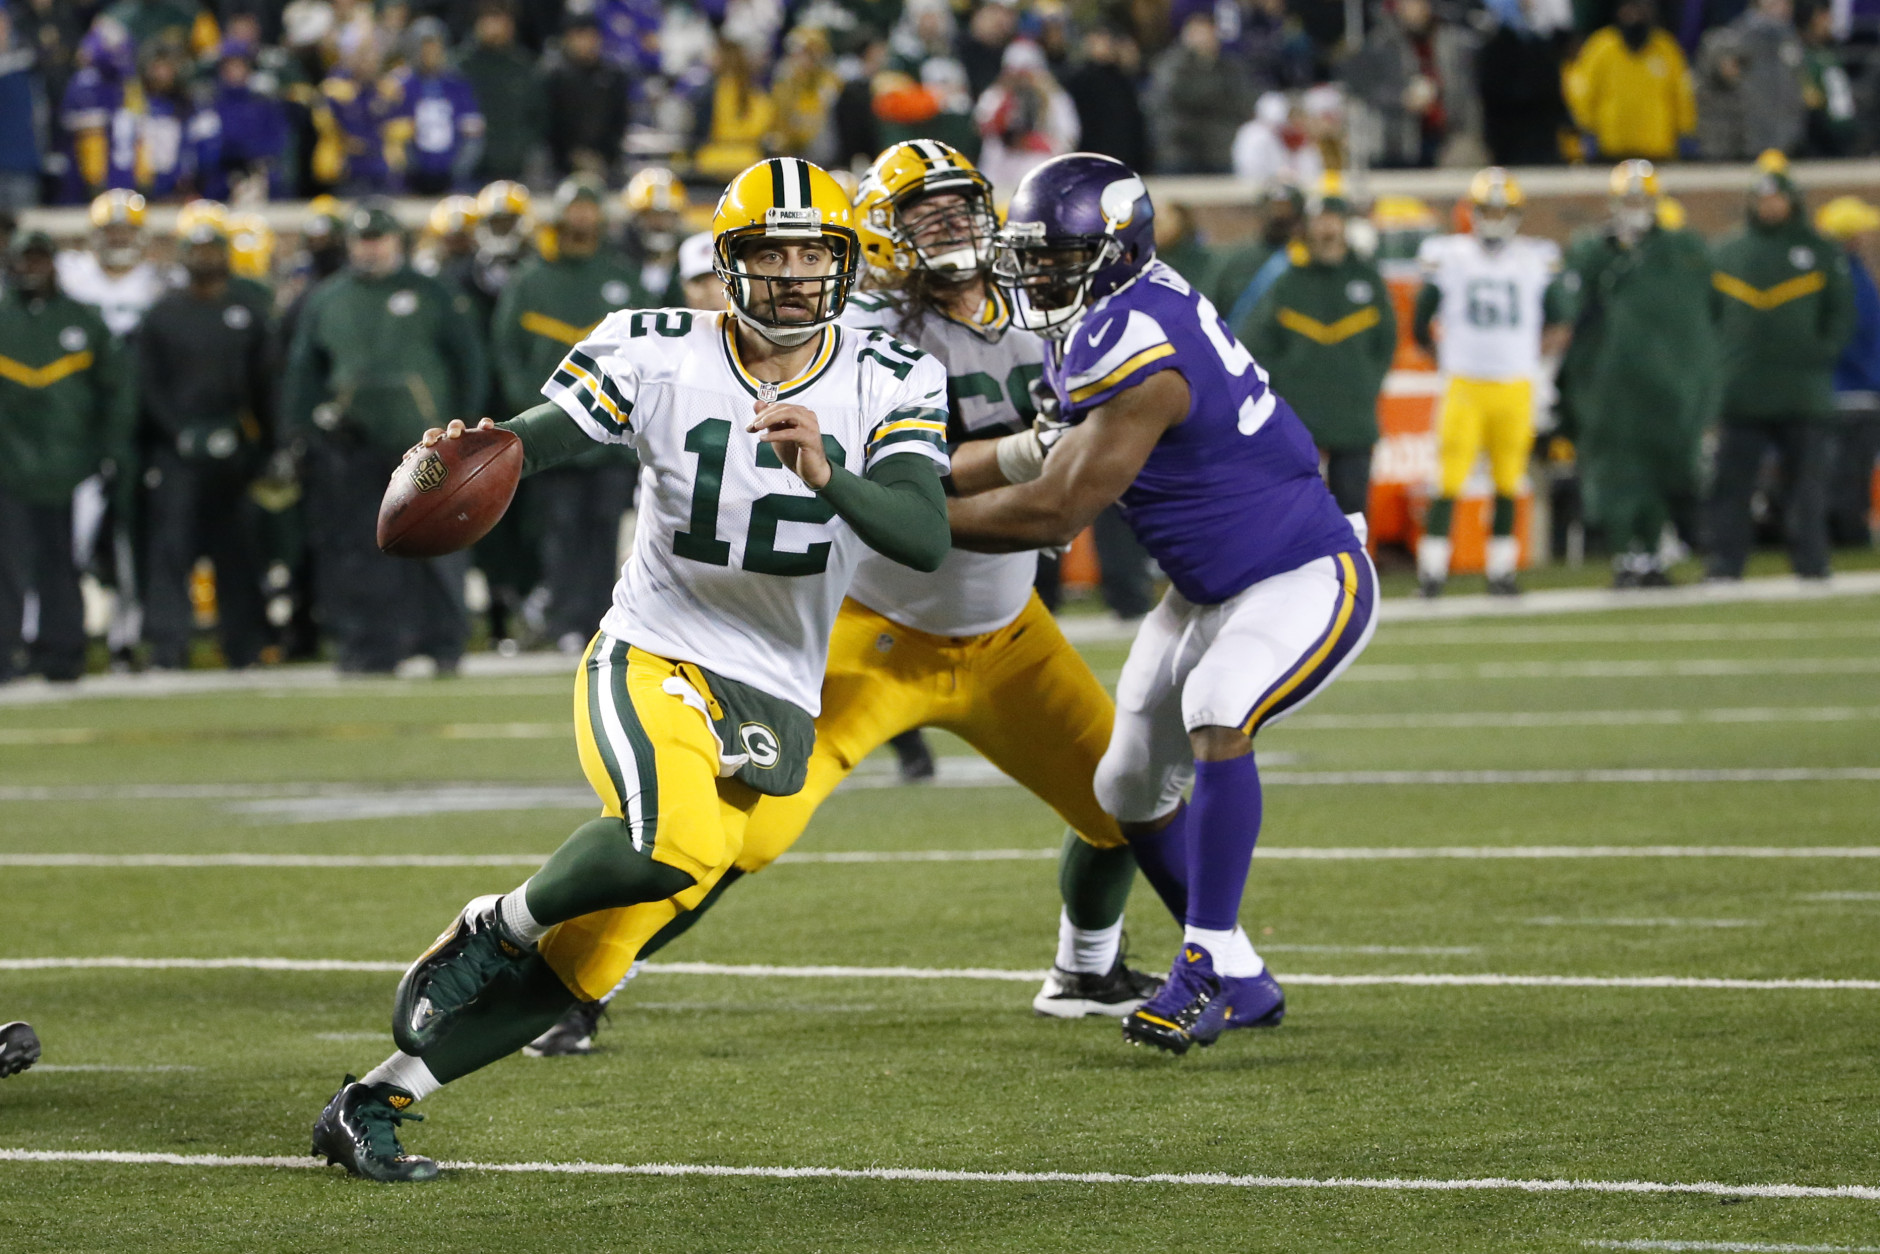 Green Bay Packers quarterback Aaron Rodgers (12) scrambles against the Minnesota Vikings during the second half of an NFL football game in Minneapolis, Sunday, Nov. 22, 2015. (AP Photo/Ann Heisenfelt)